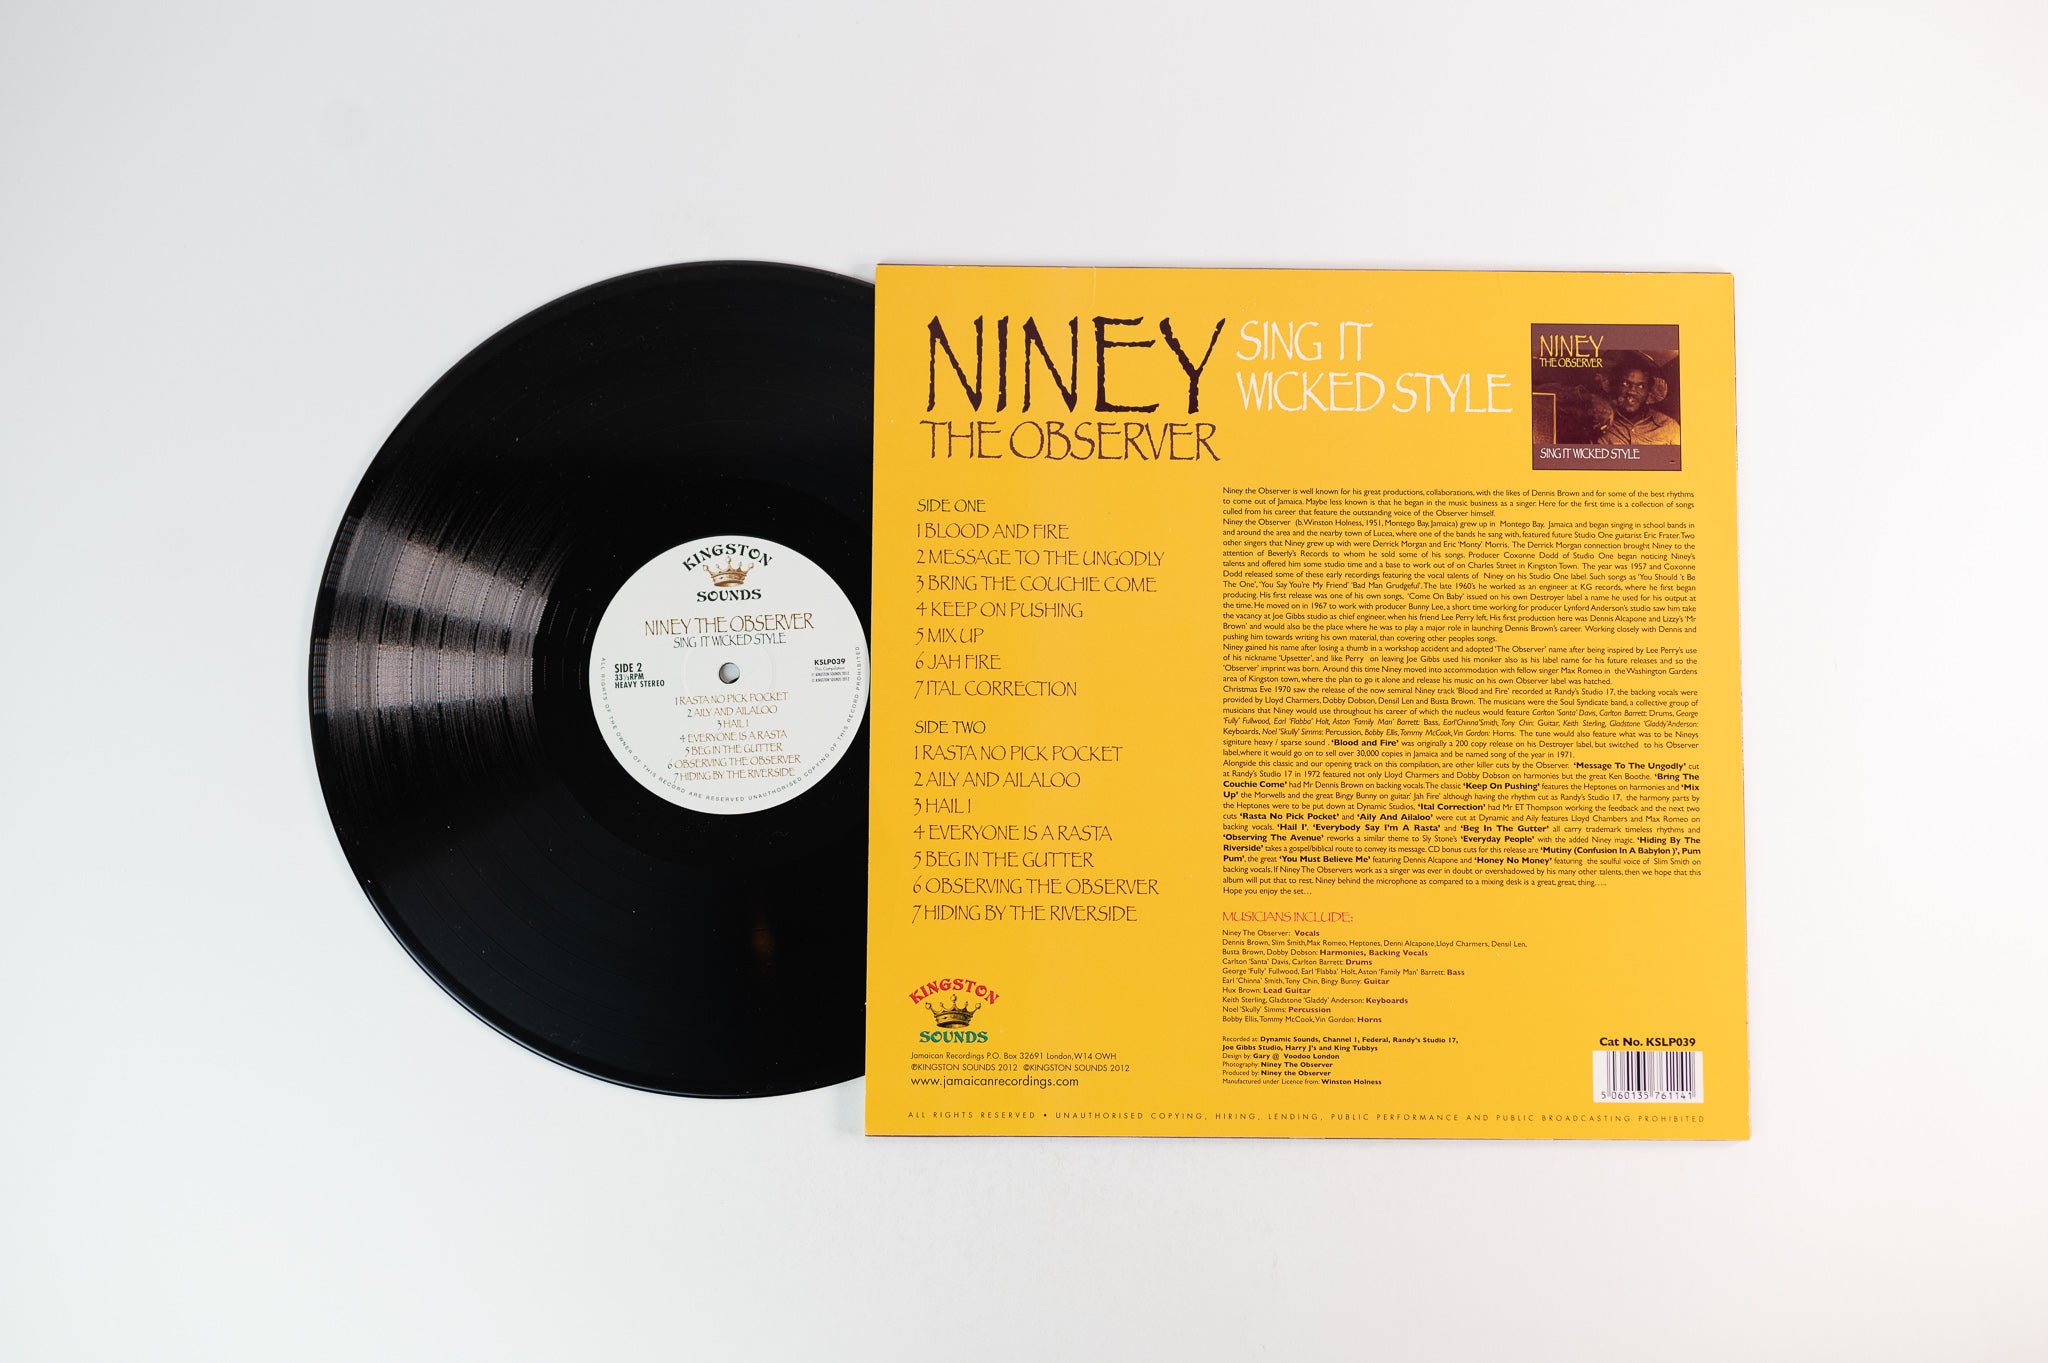 Niney The Observer - Sing It Wicked Style on Kingston Sounds